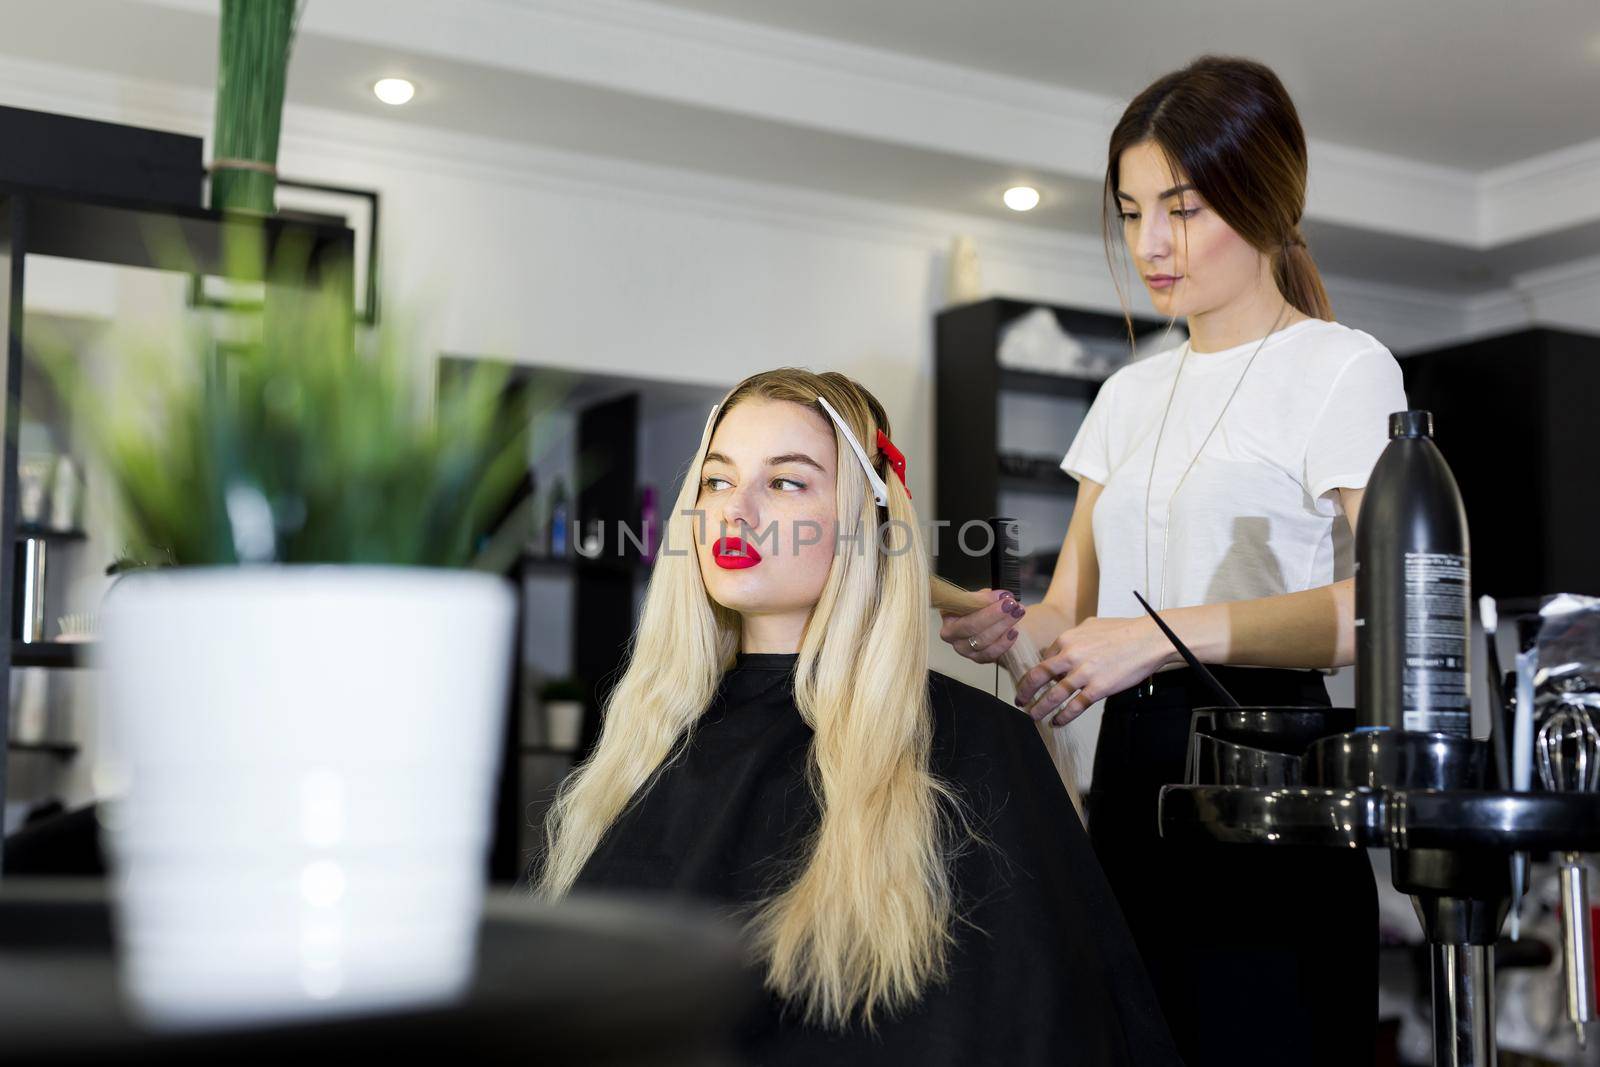 Process of dyeing hair at beauty salon. by StudioPeace